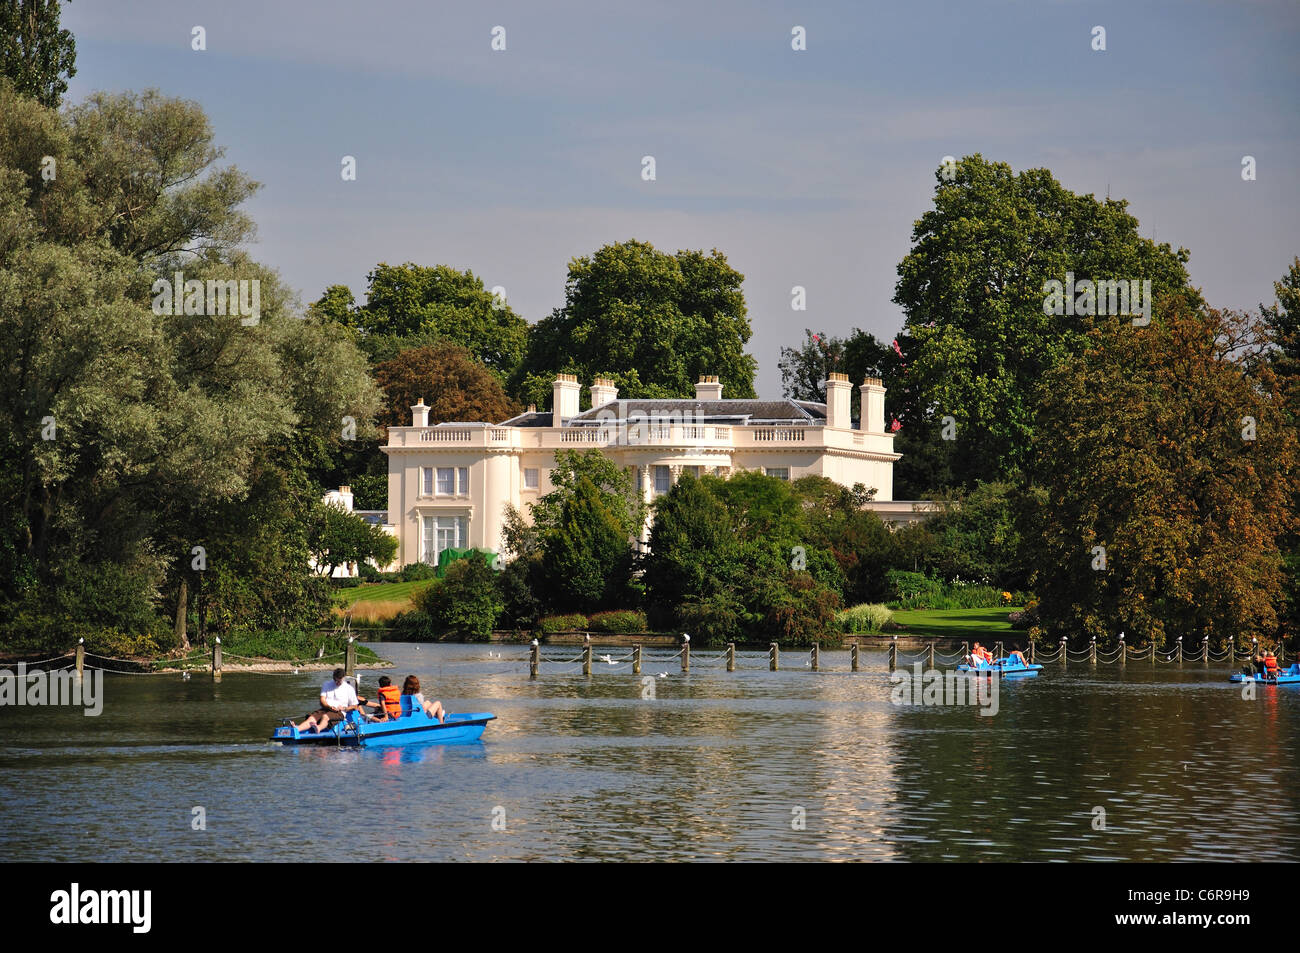 The Holme property by Boating Lake, Regent's Park, City of Westminster, Greater London, England, United Kingdom Stock Photo